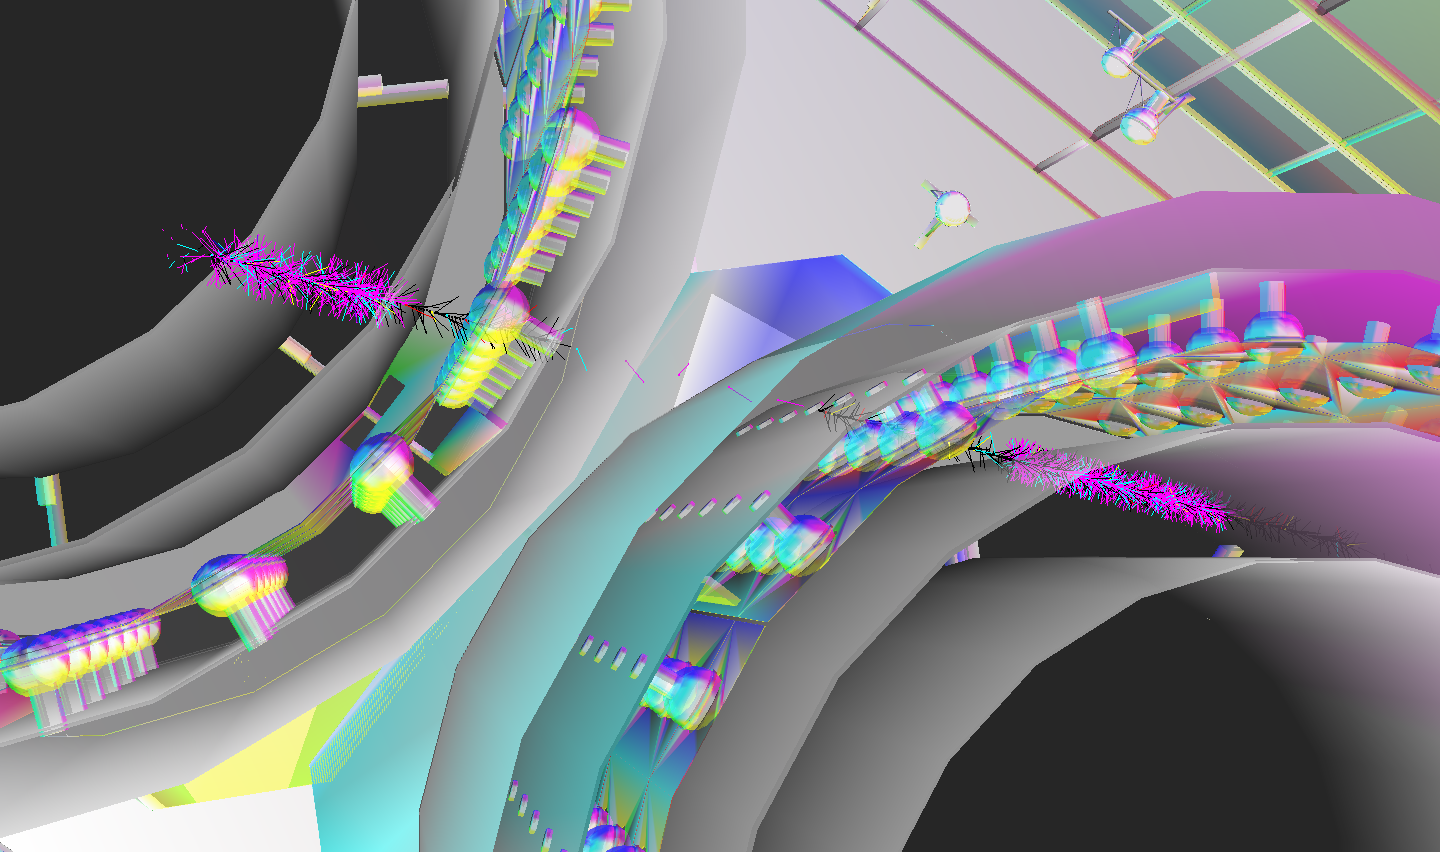 /env/geant4/geometry/collada/g4daeview/20140518-174941.png